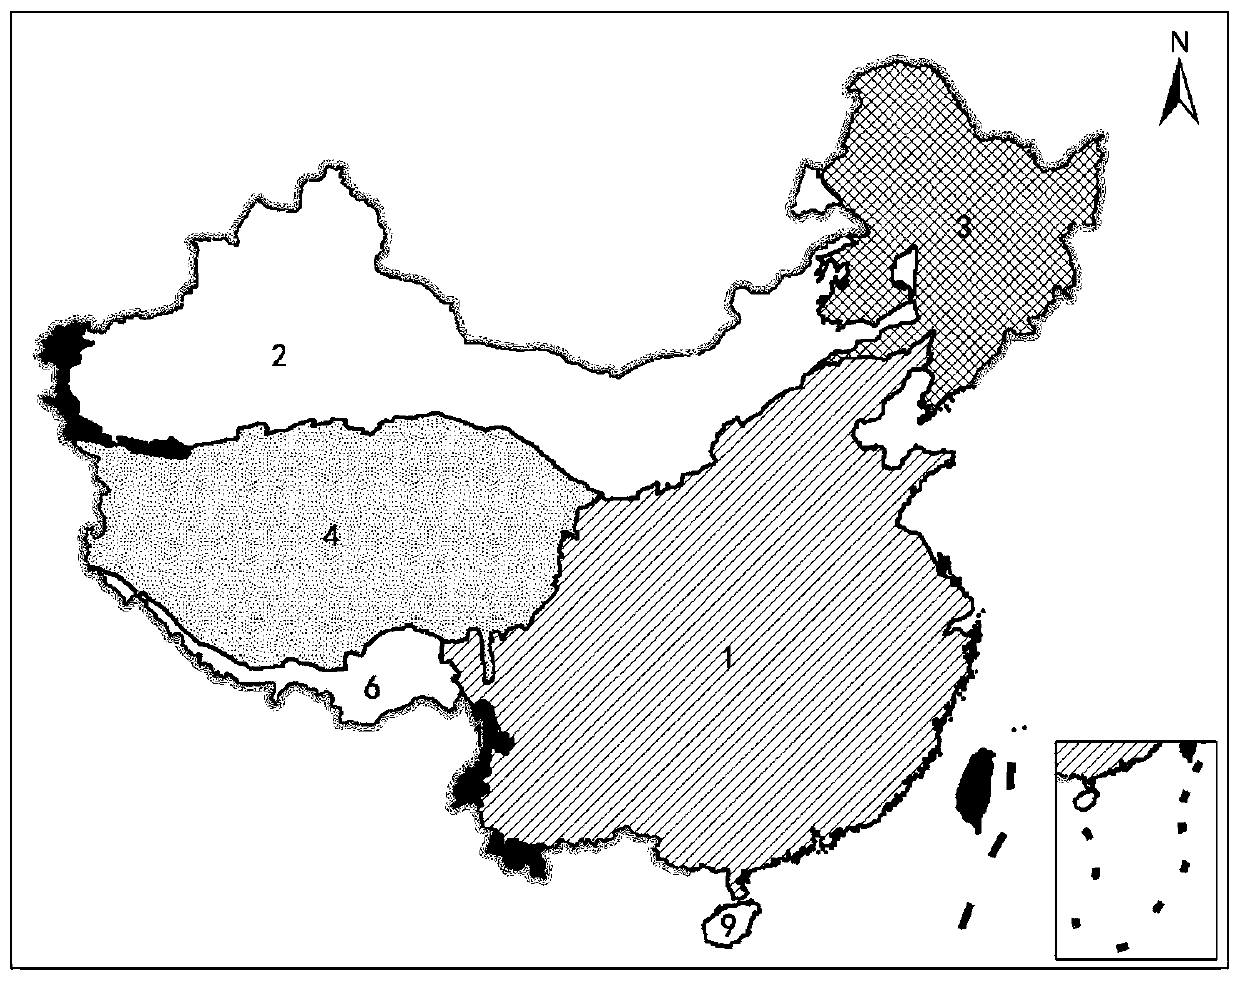 Animal geographical division method based on species spatial distribution relations